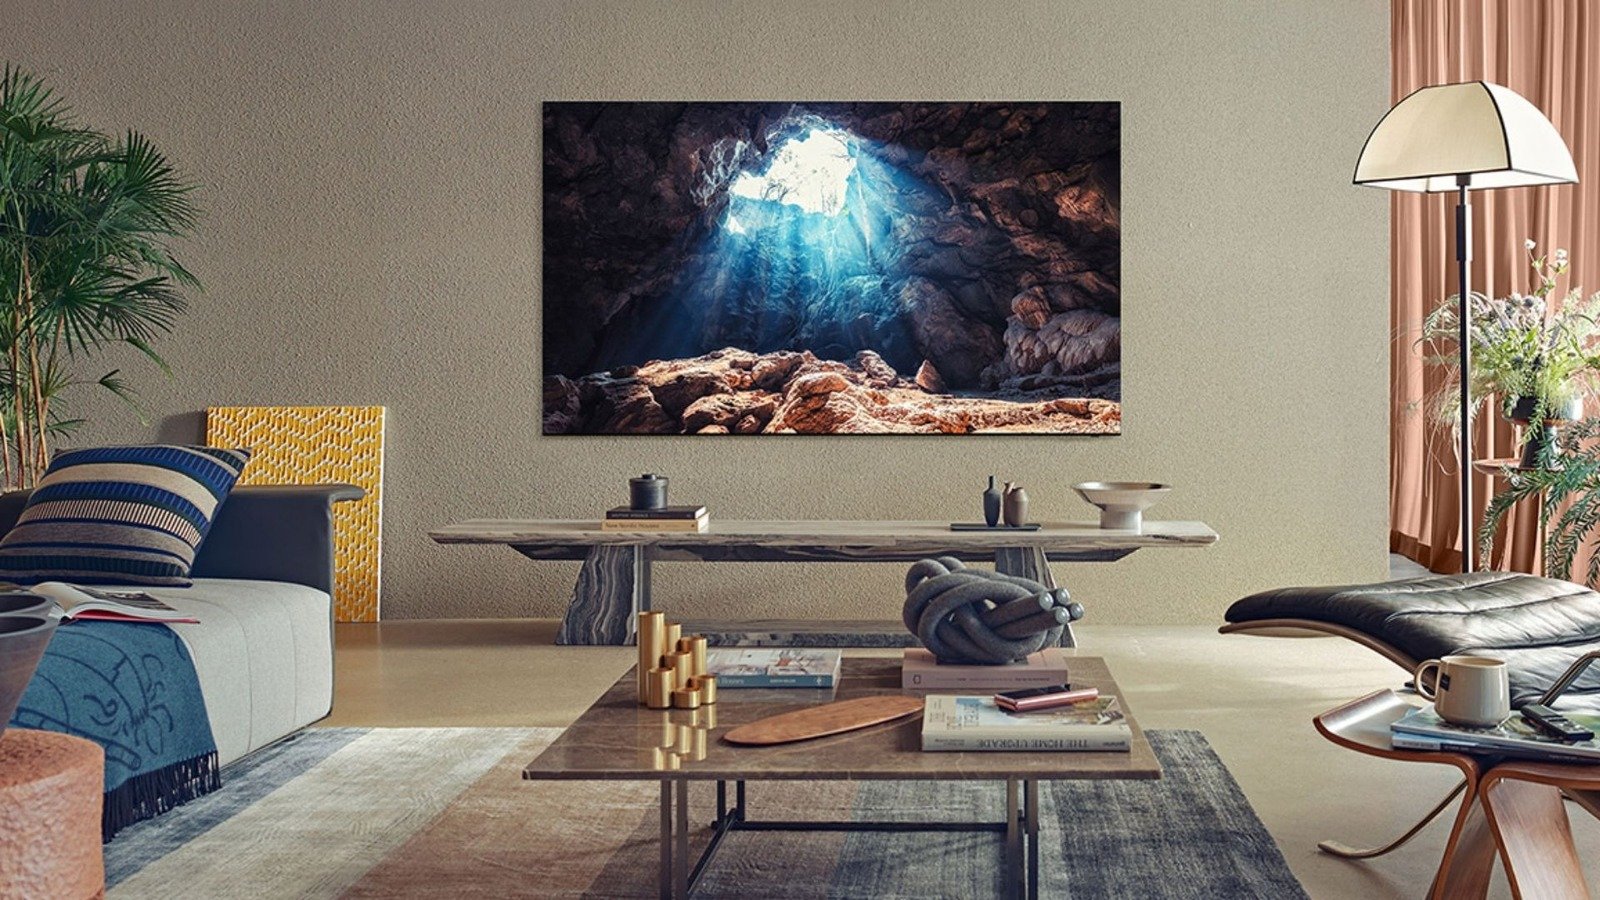 8K TVs That Are Actually Worth The Money